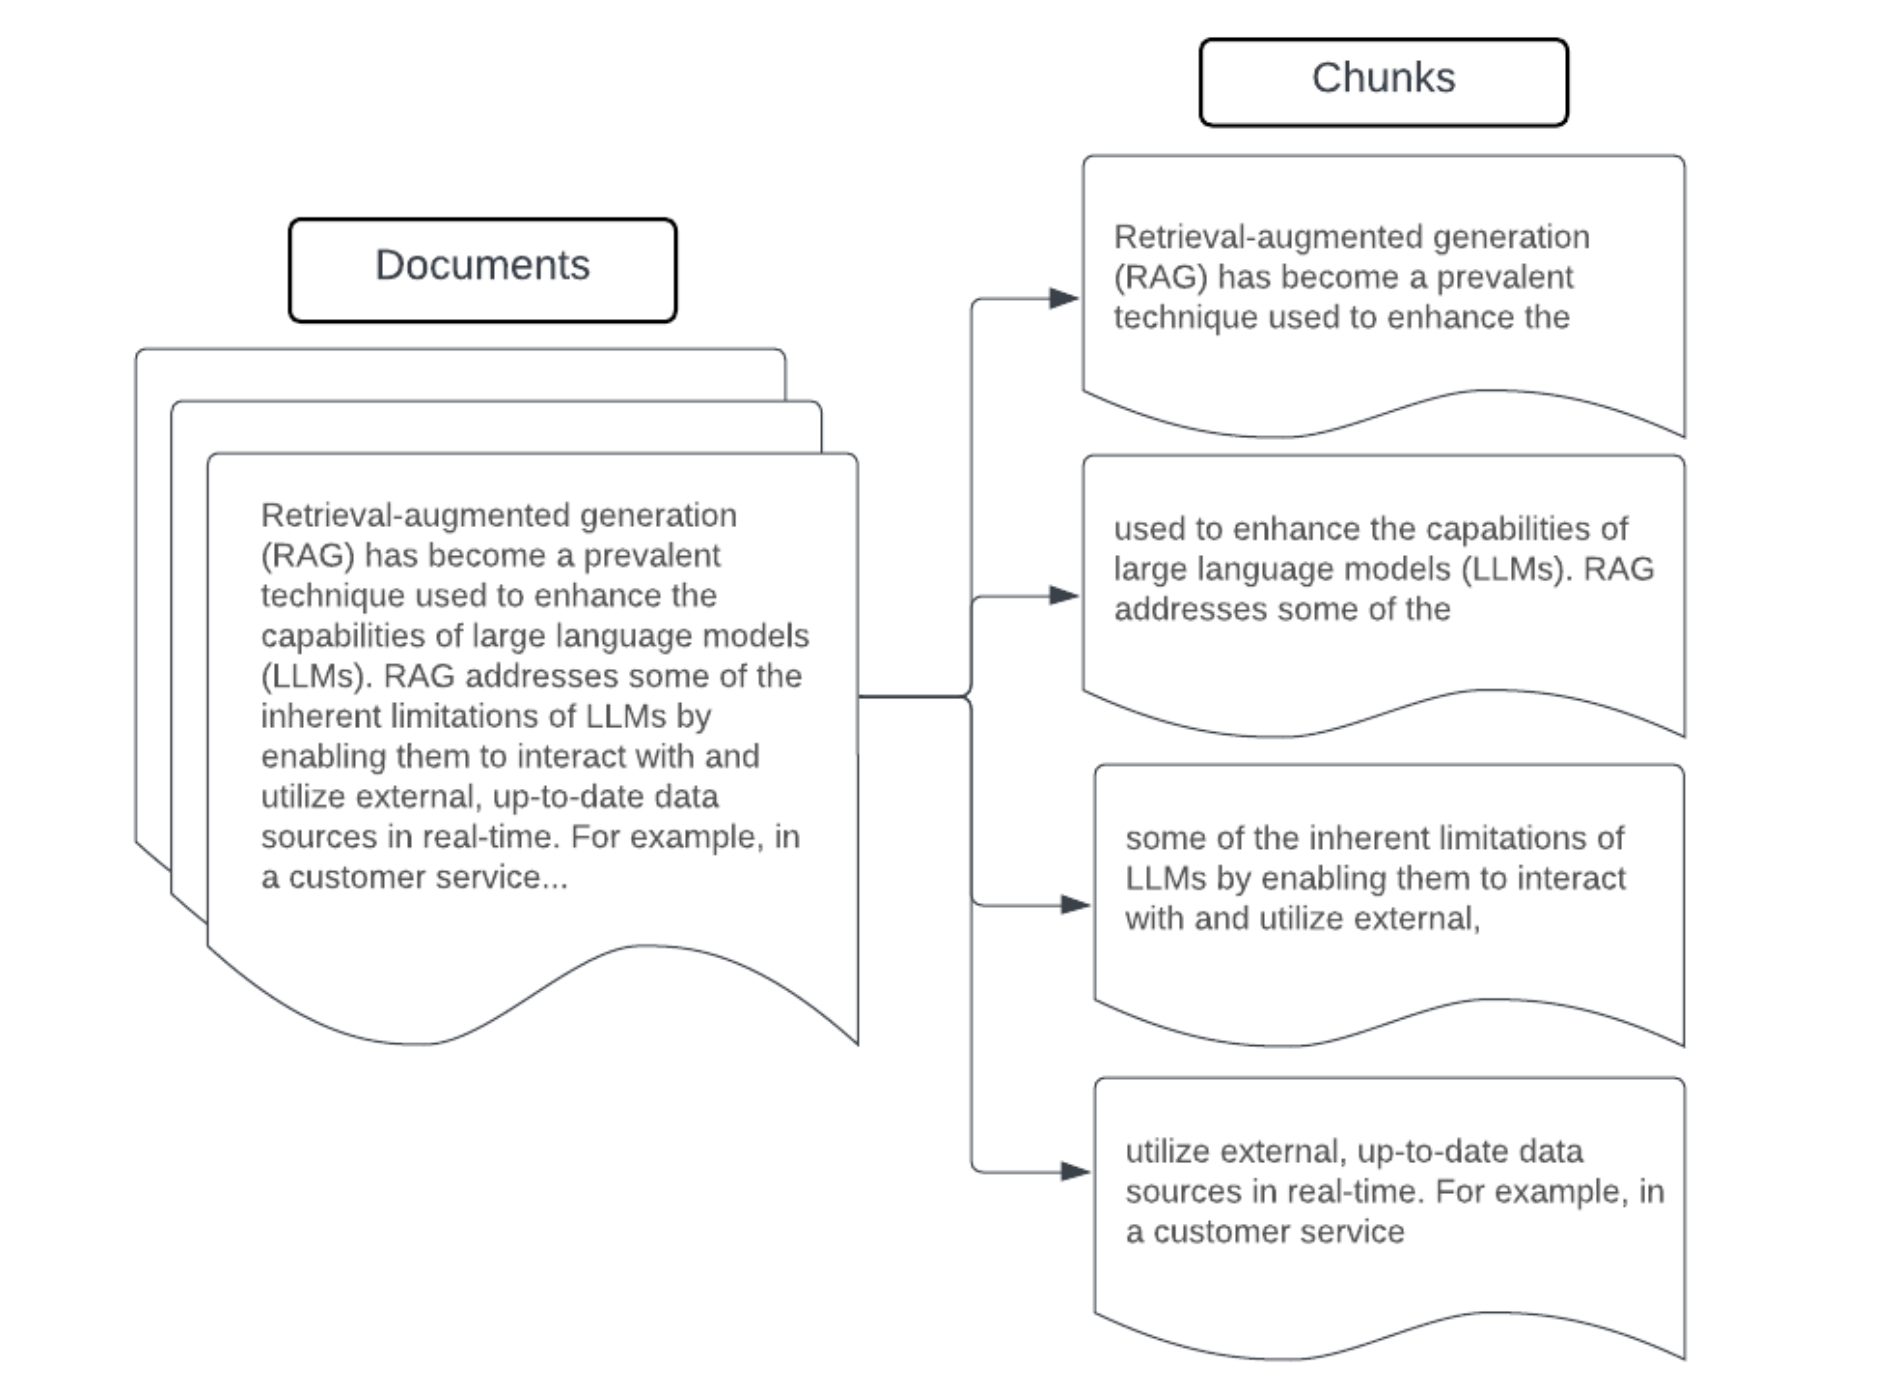 Image showing an example of fix-sized chunking of a document.